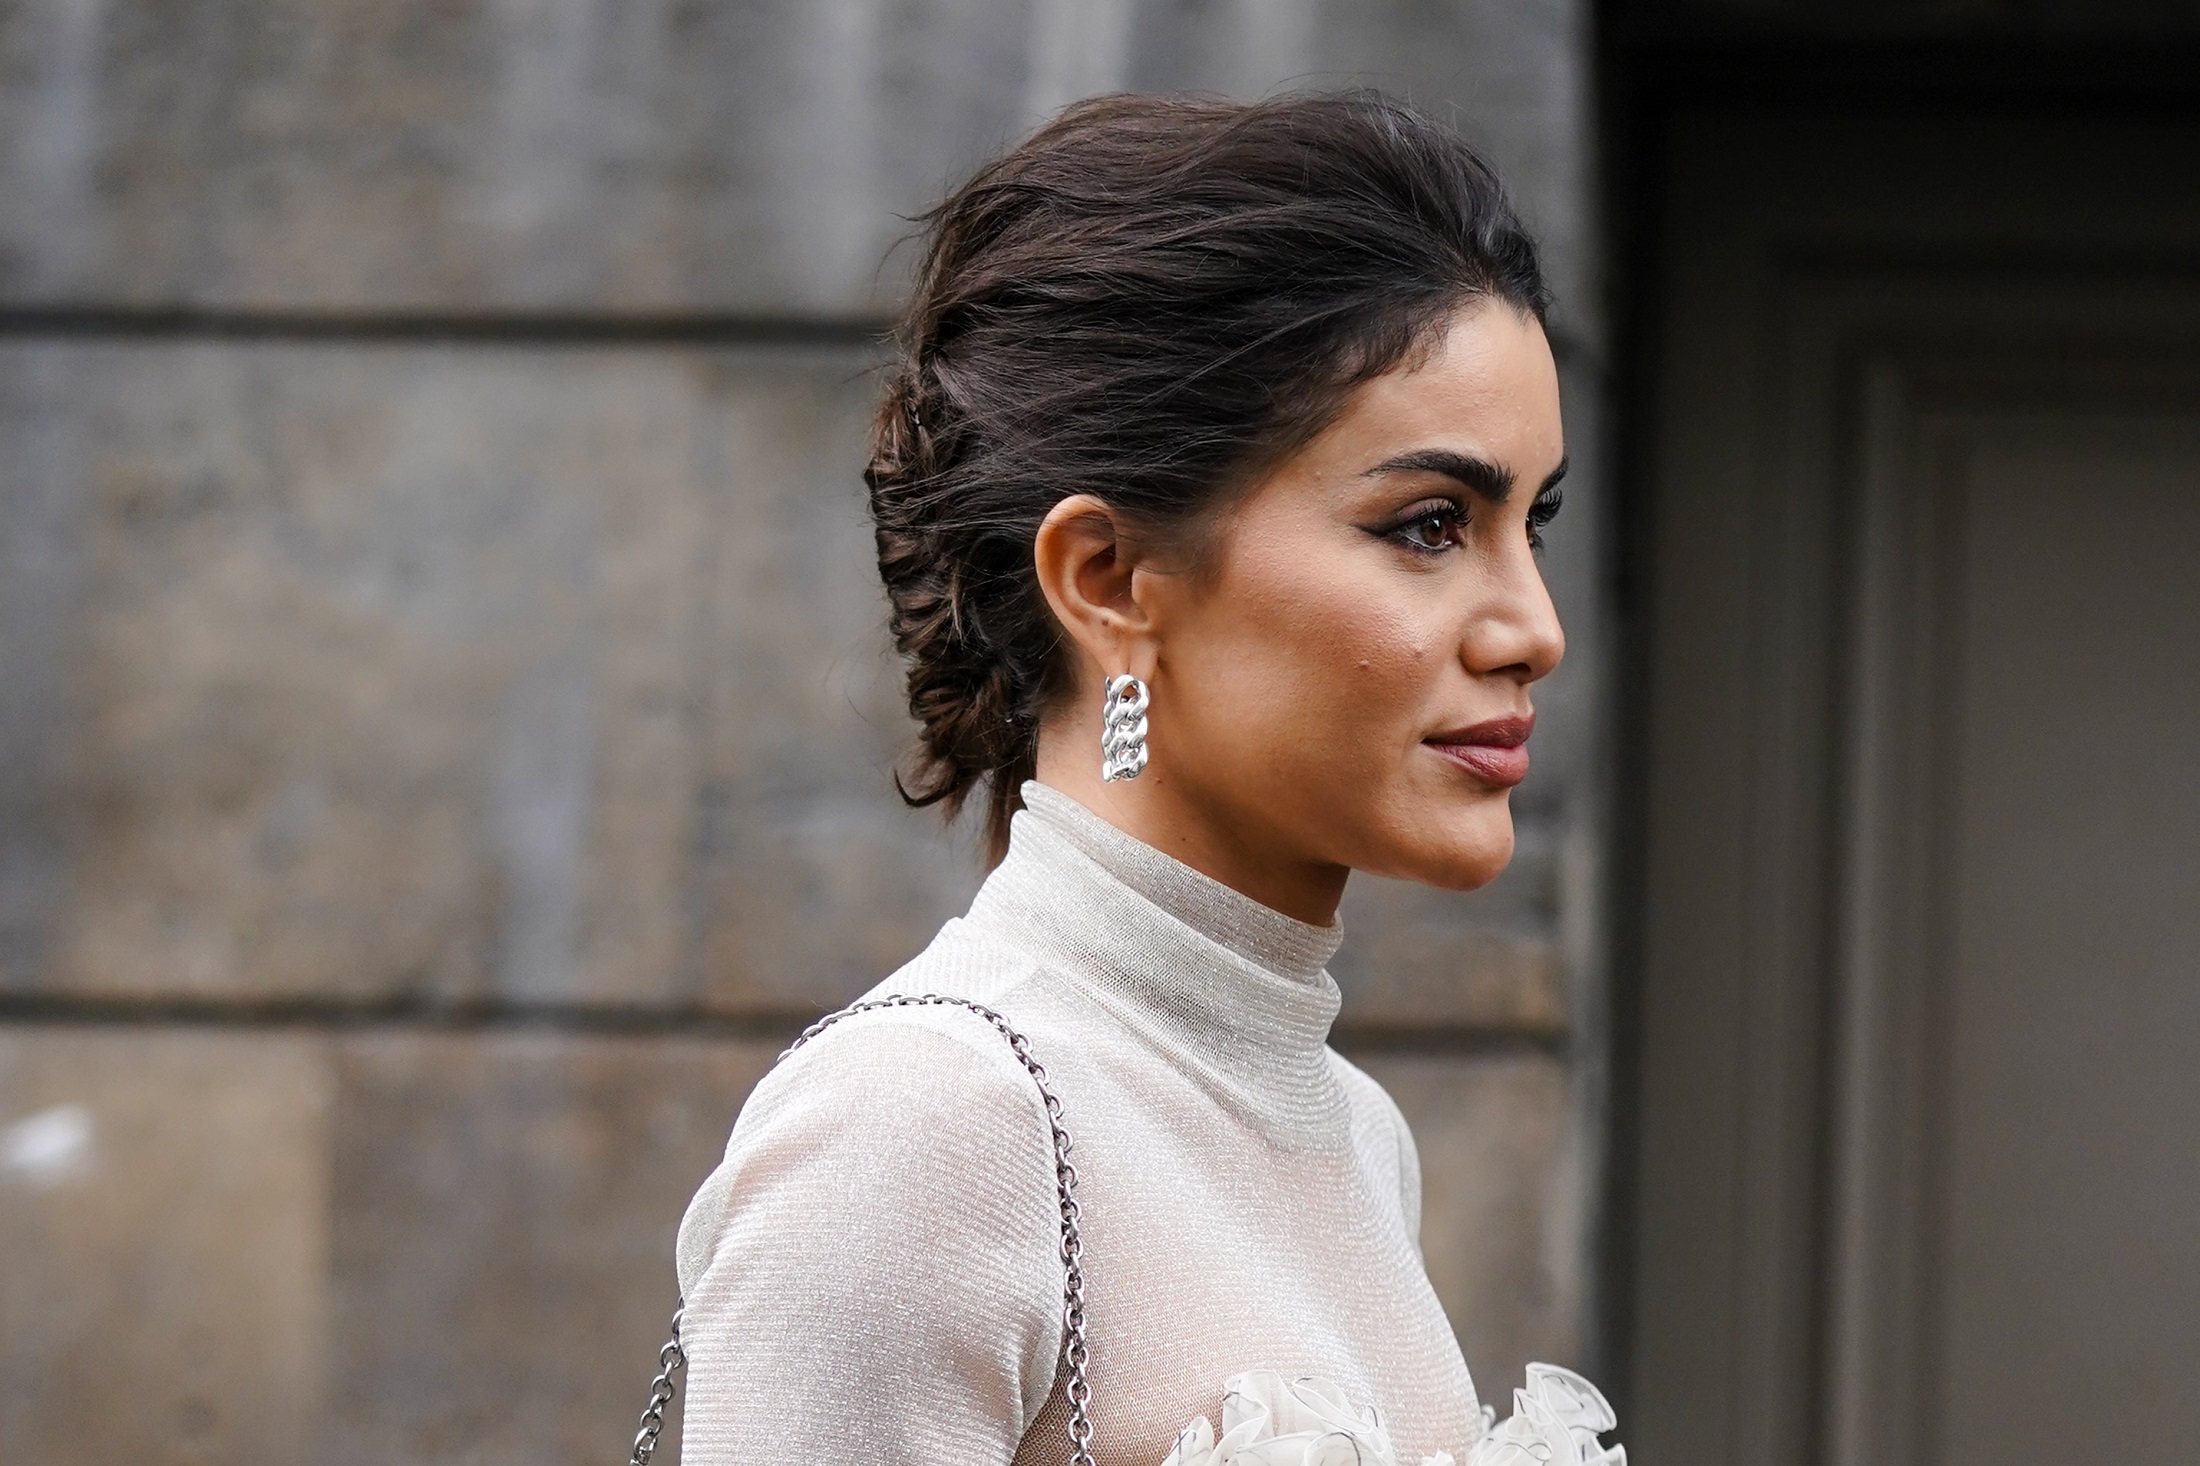 Hairstyles for a wedding. Here are some tips so that you don’t have to go to a professional